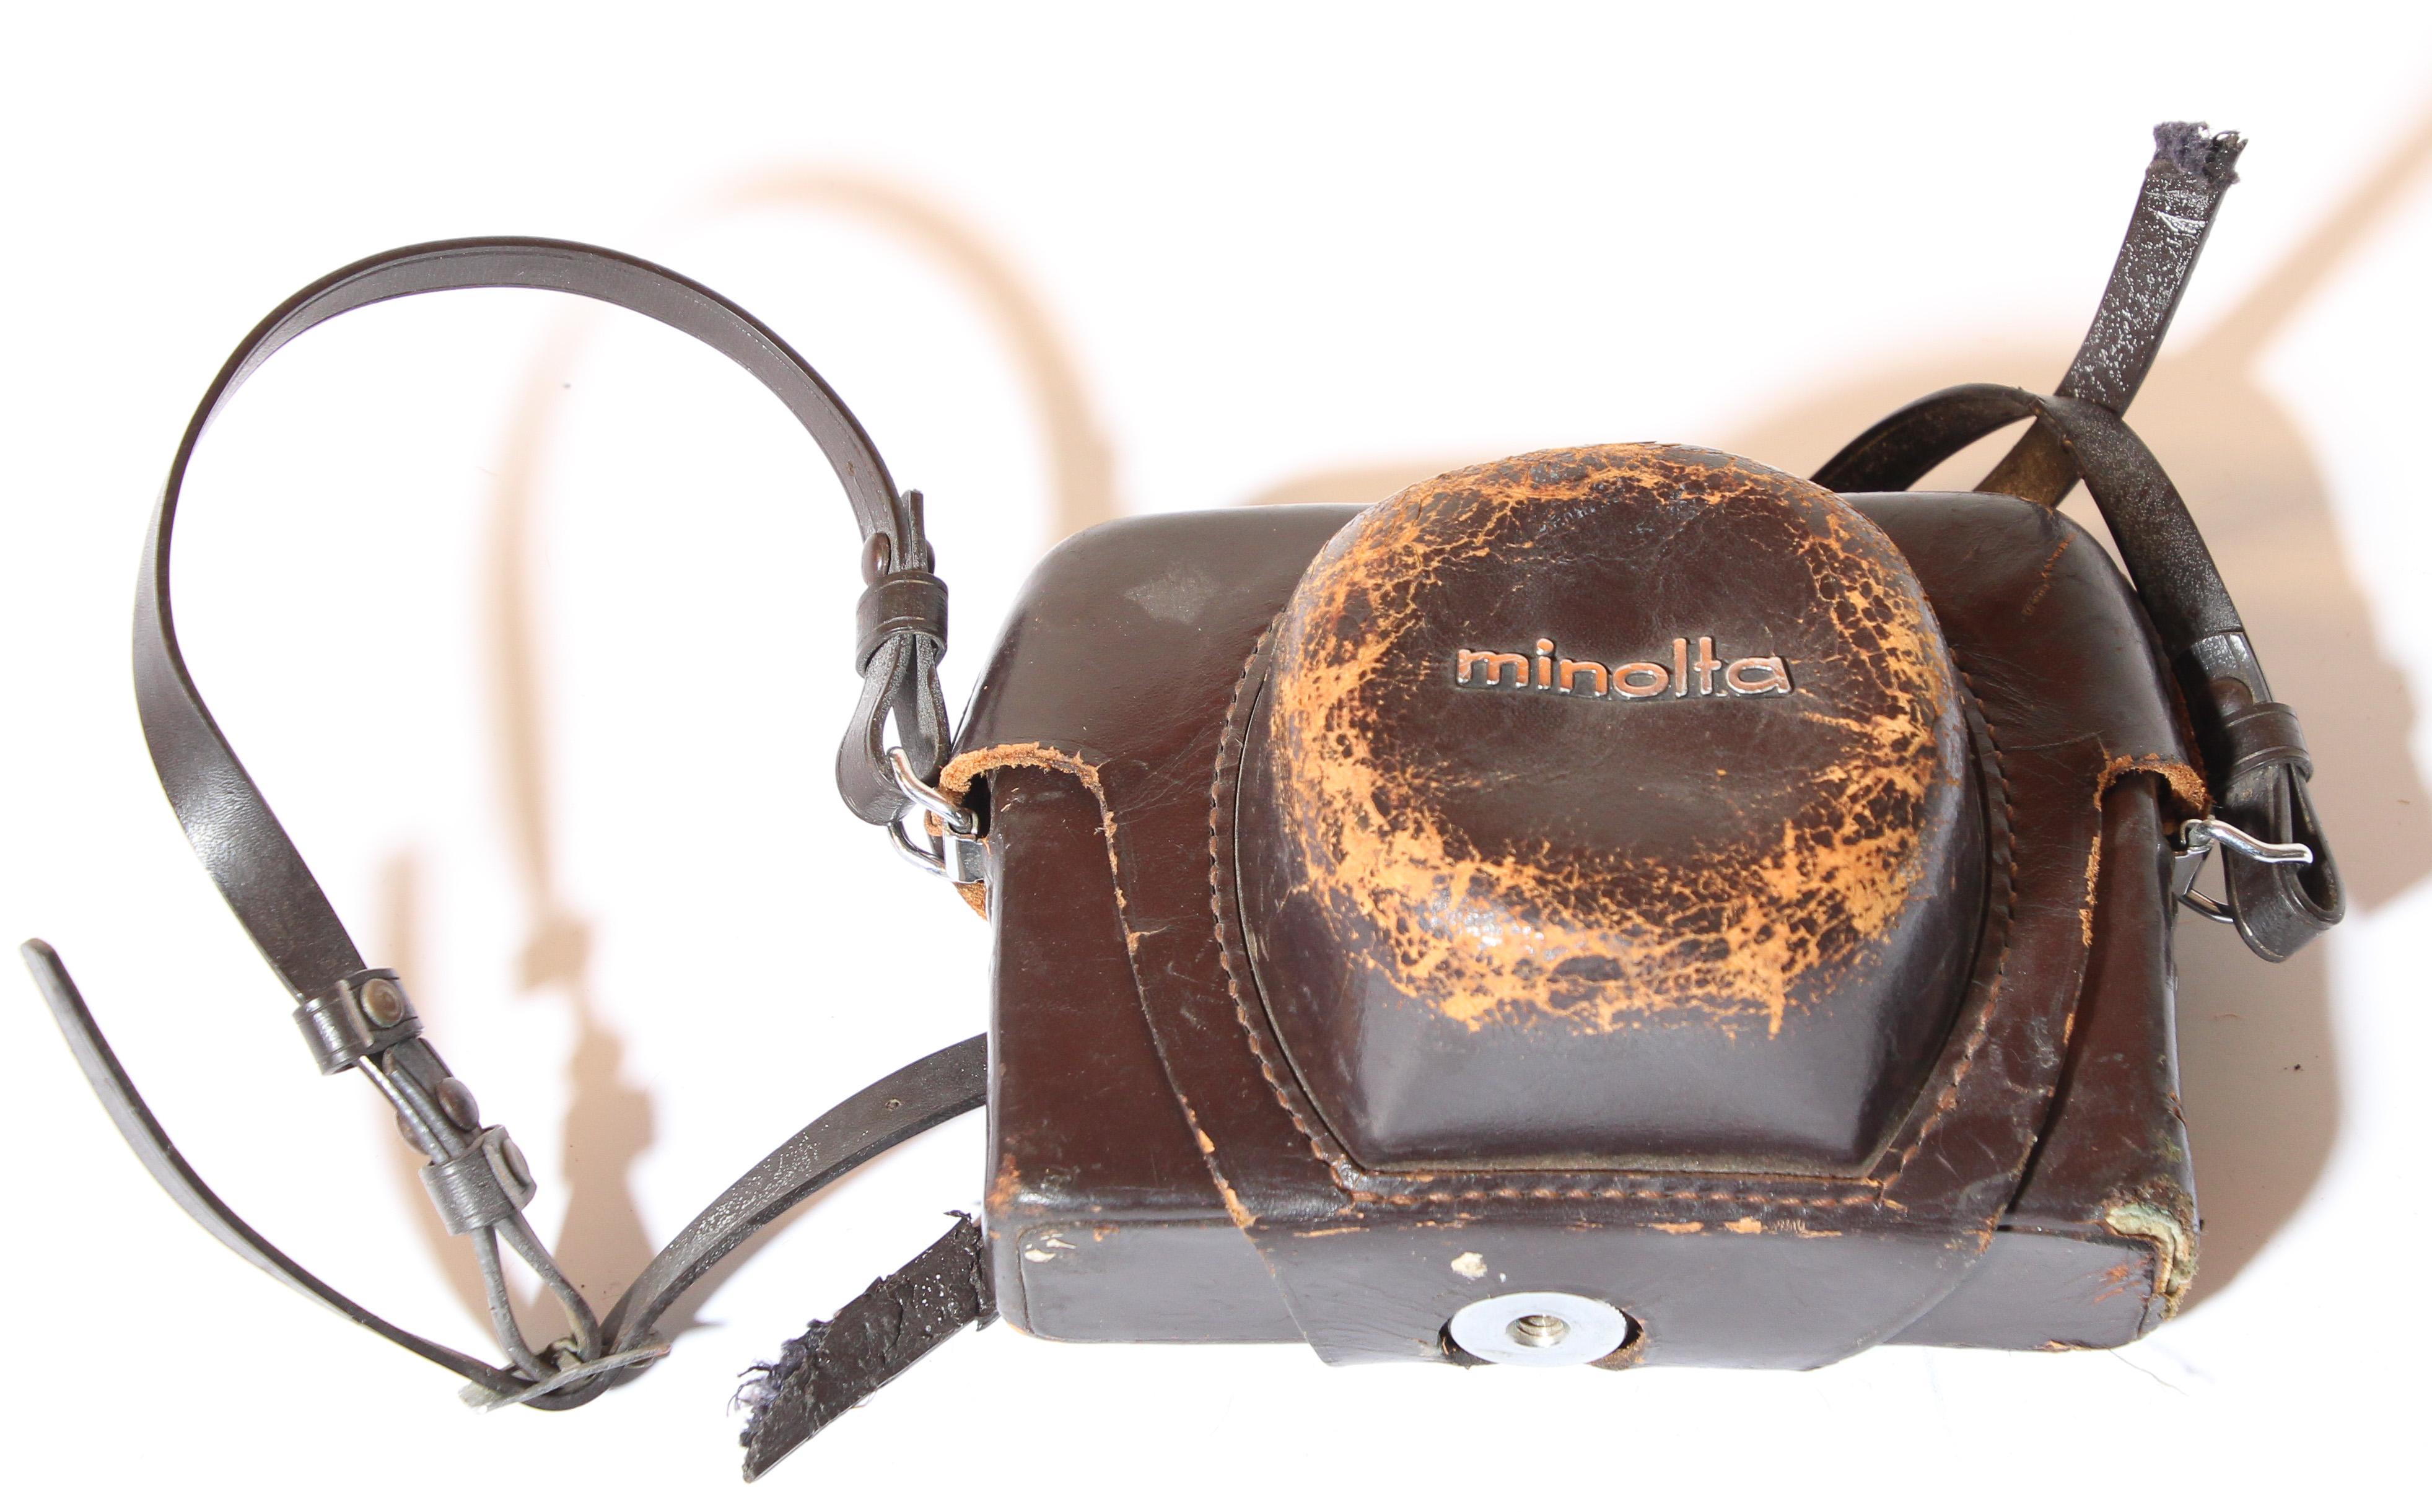 Japanese Vintage Minolta HI-MATIC 7 Film Camera with Leather Case For Sale